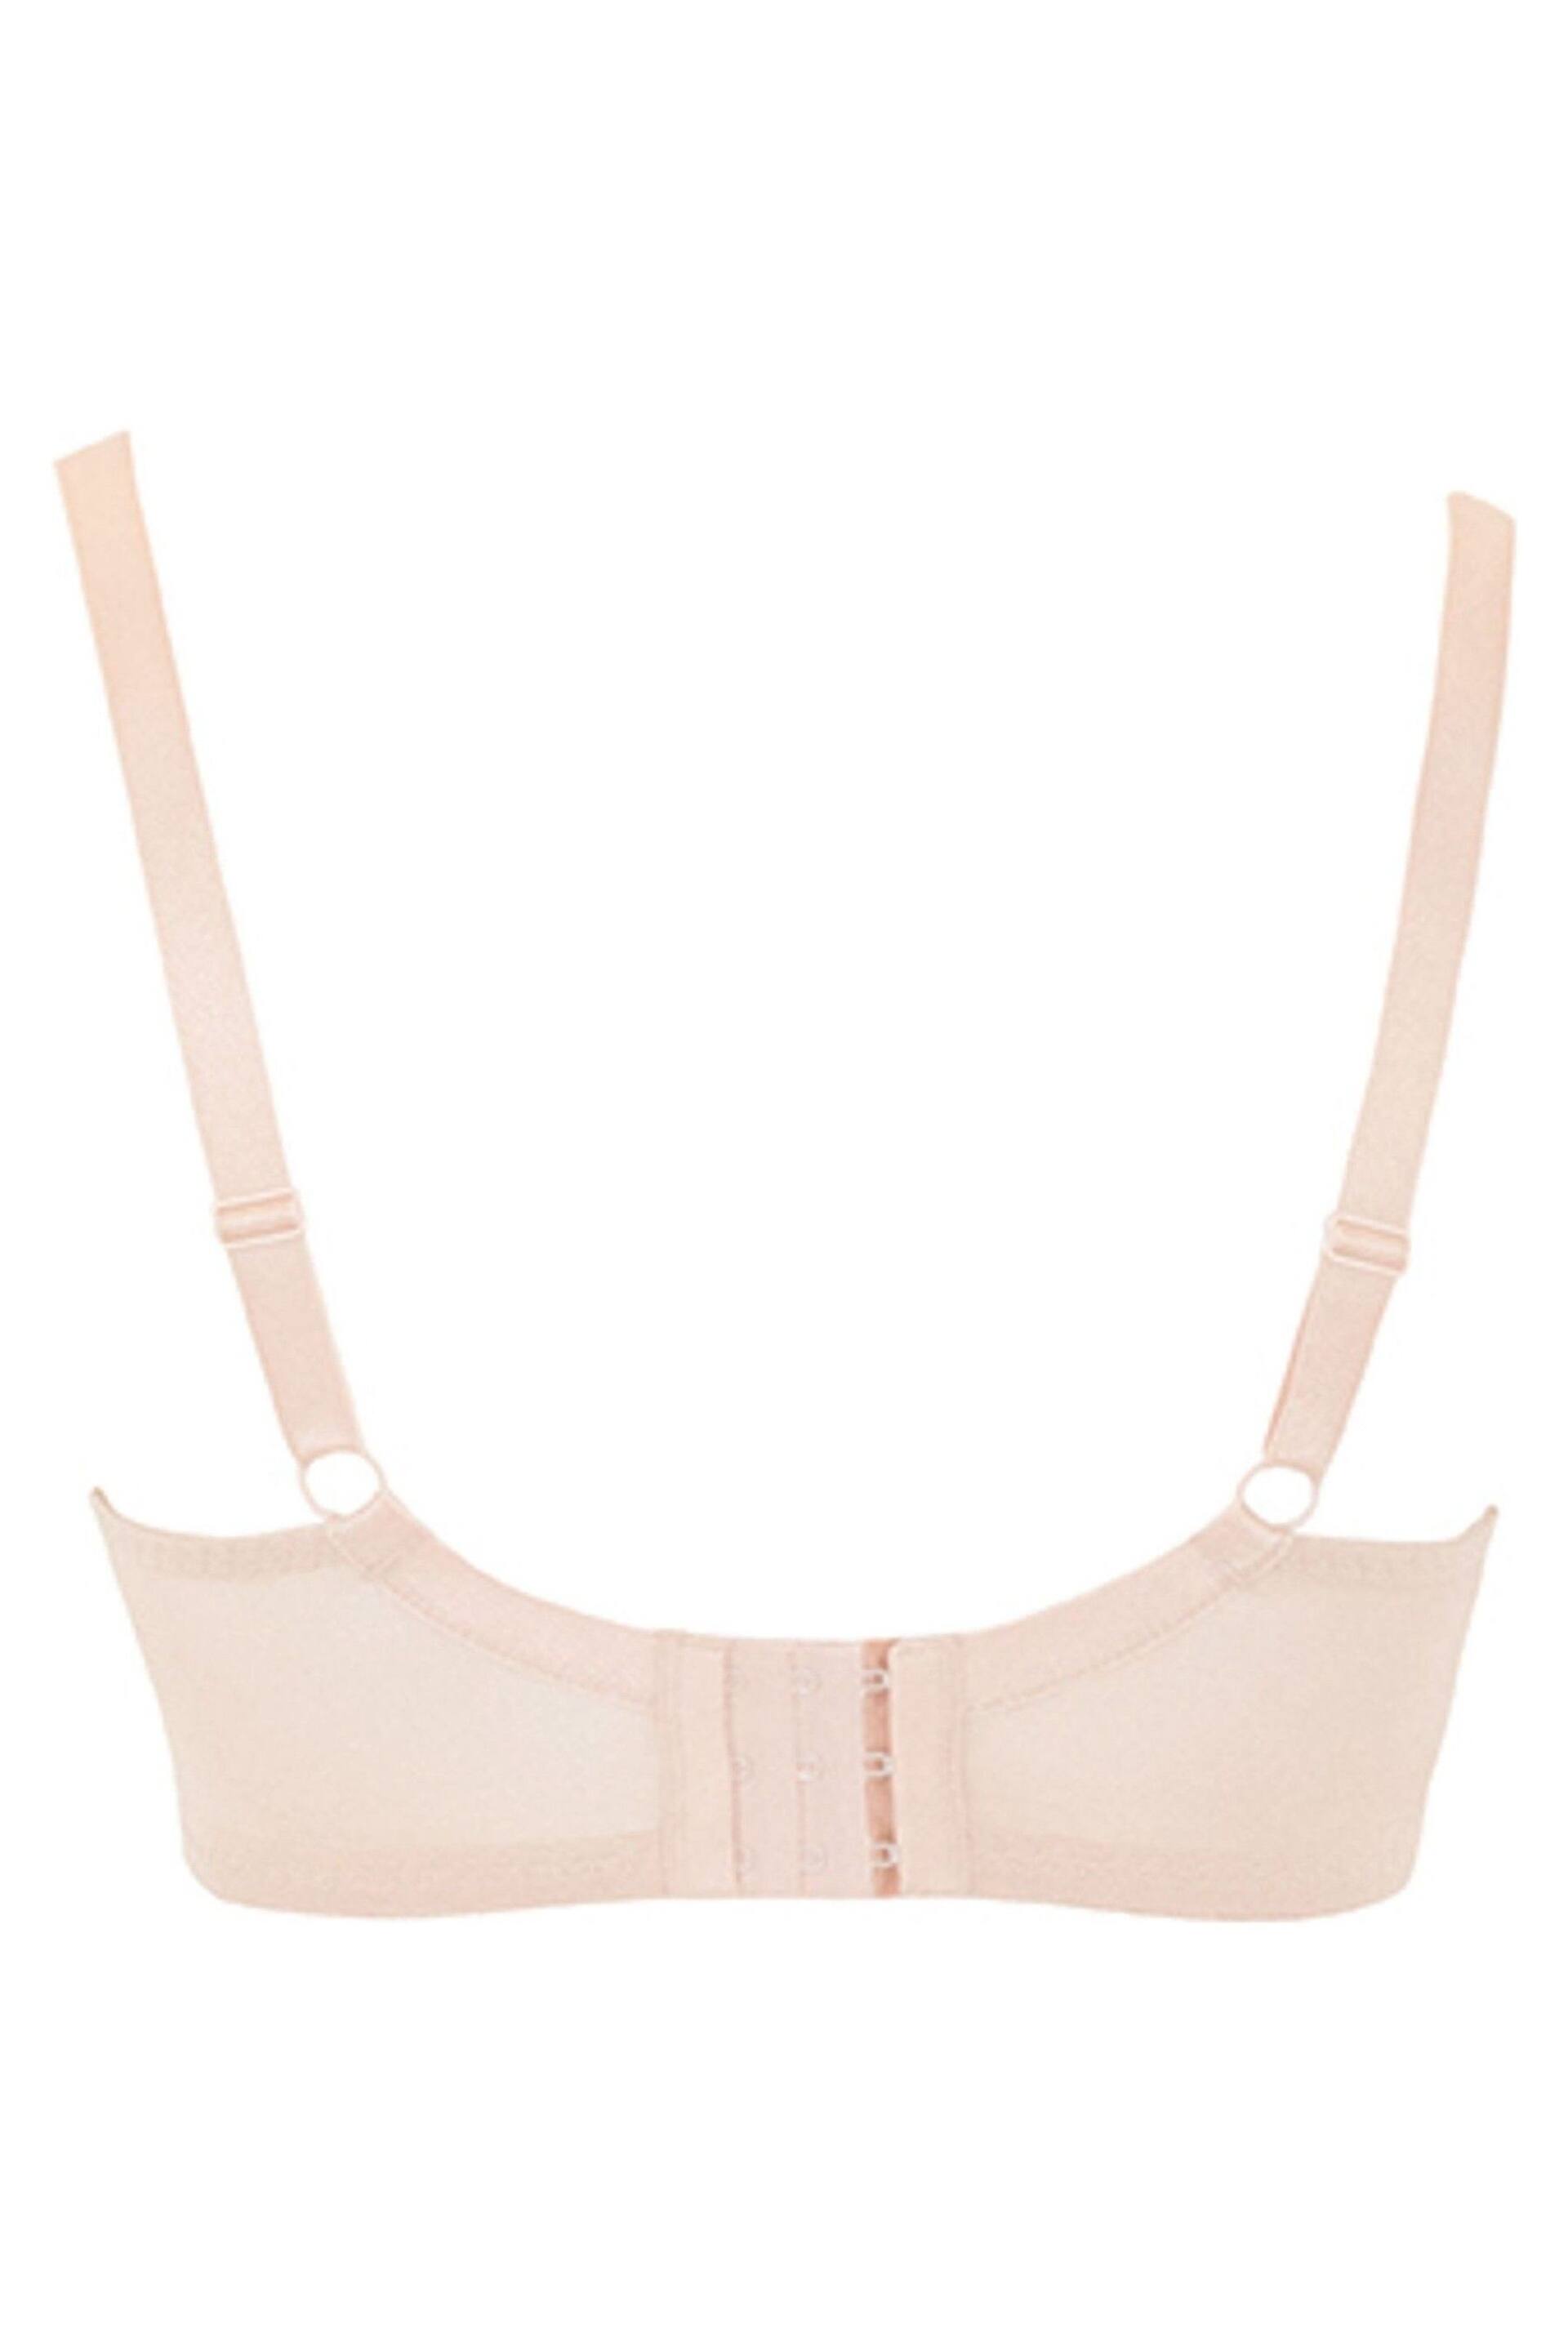 Curvy Kate Victory Side Support Balcony Bra - Image 5 of 6